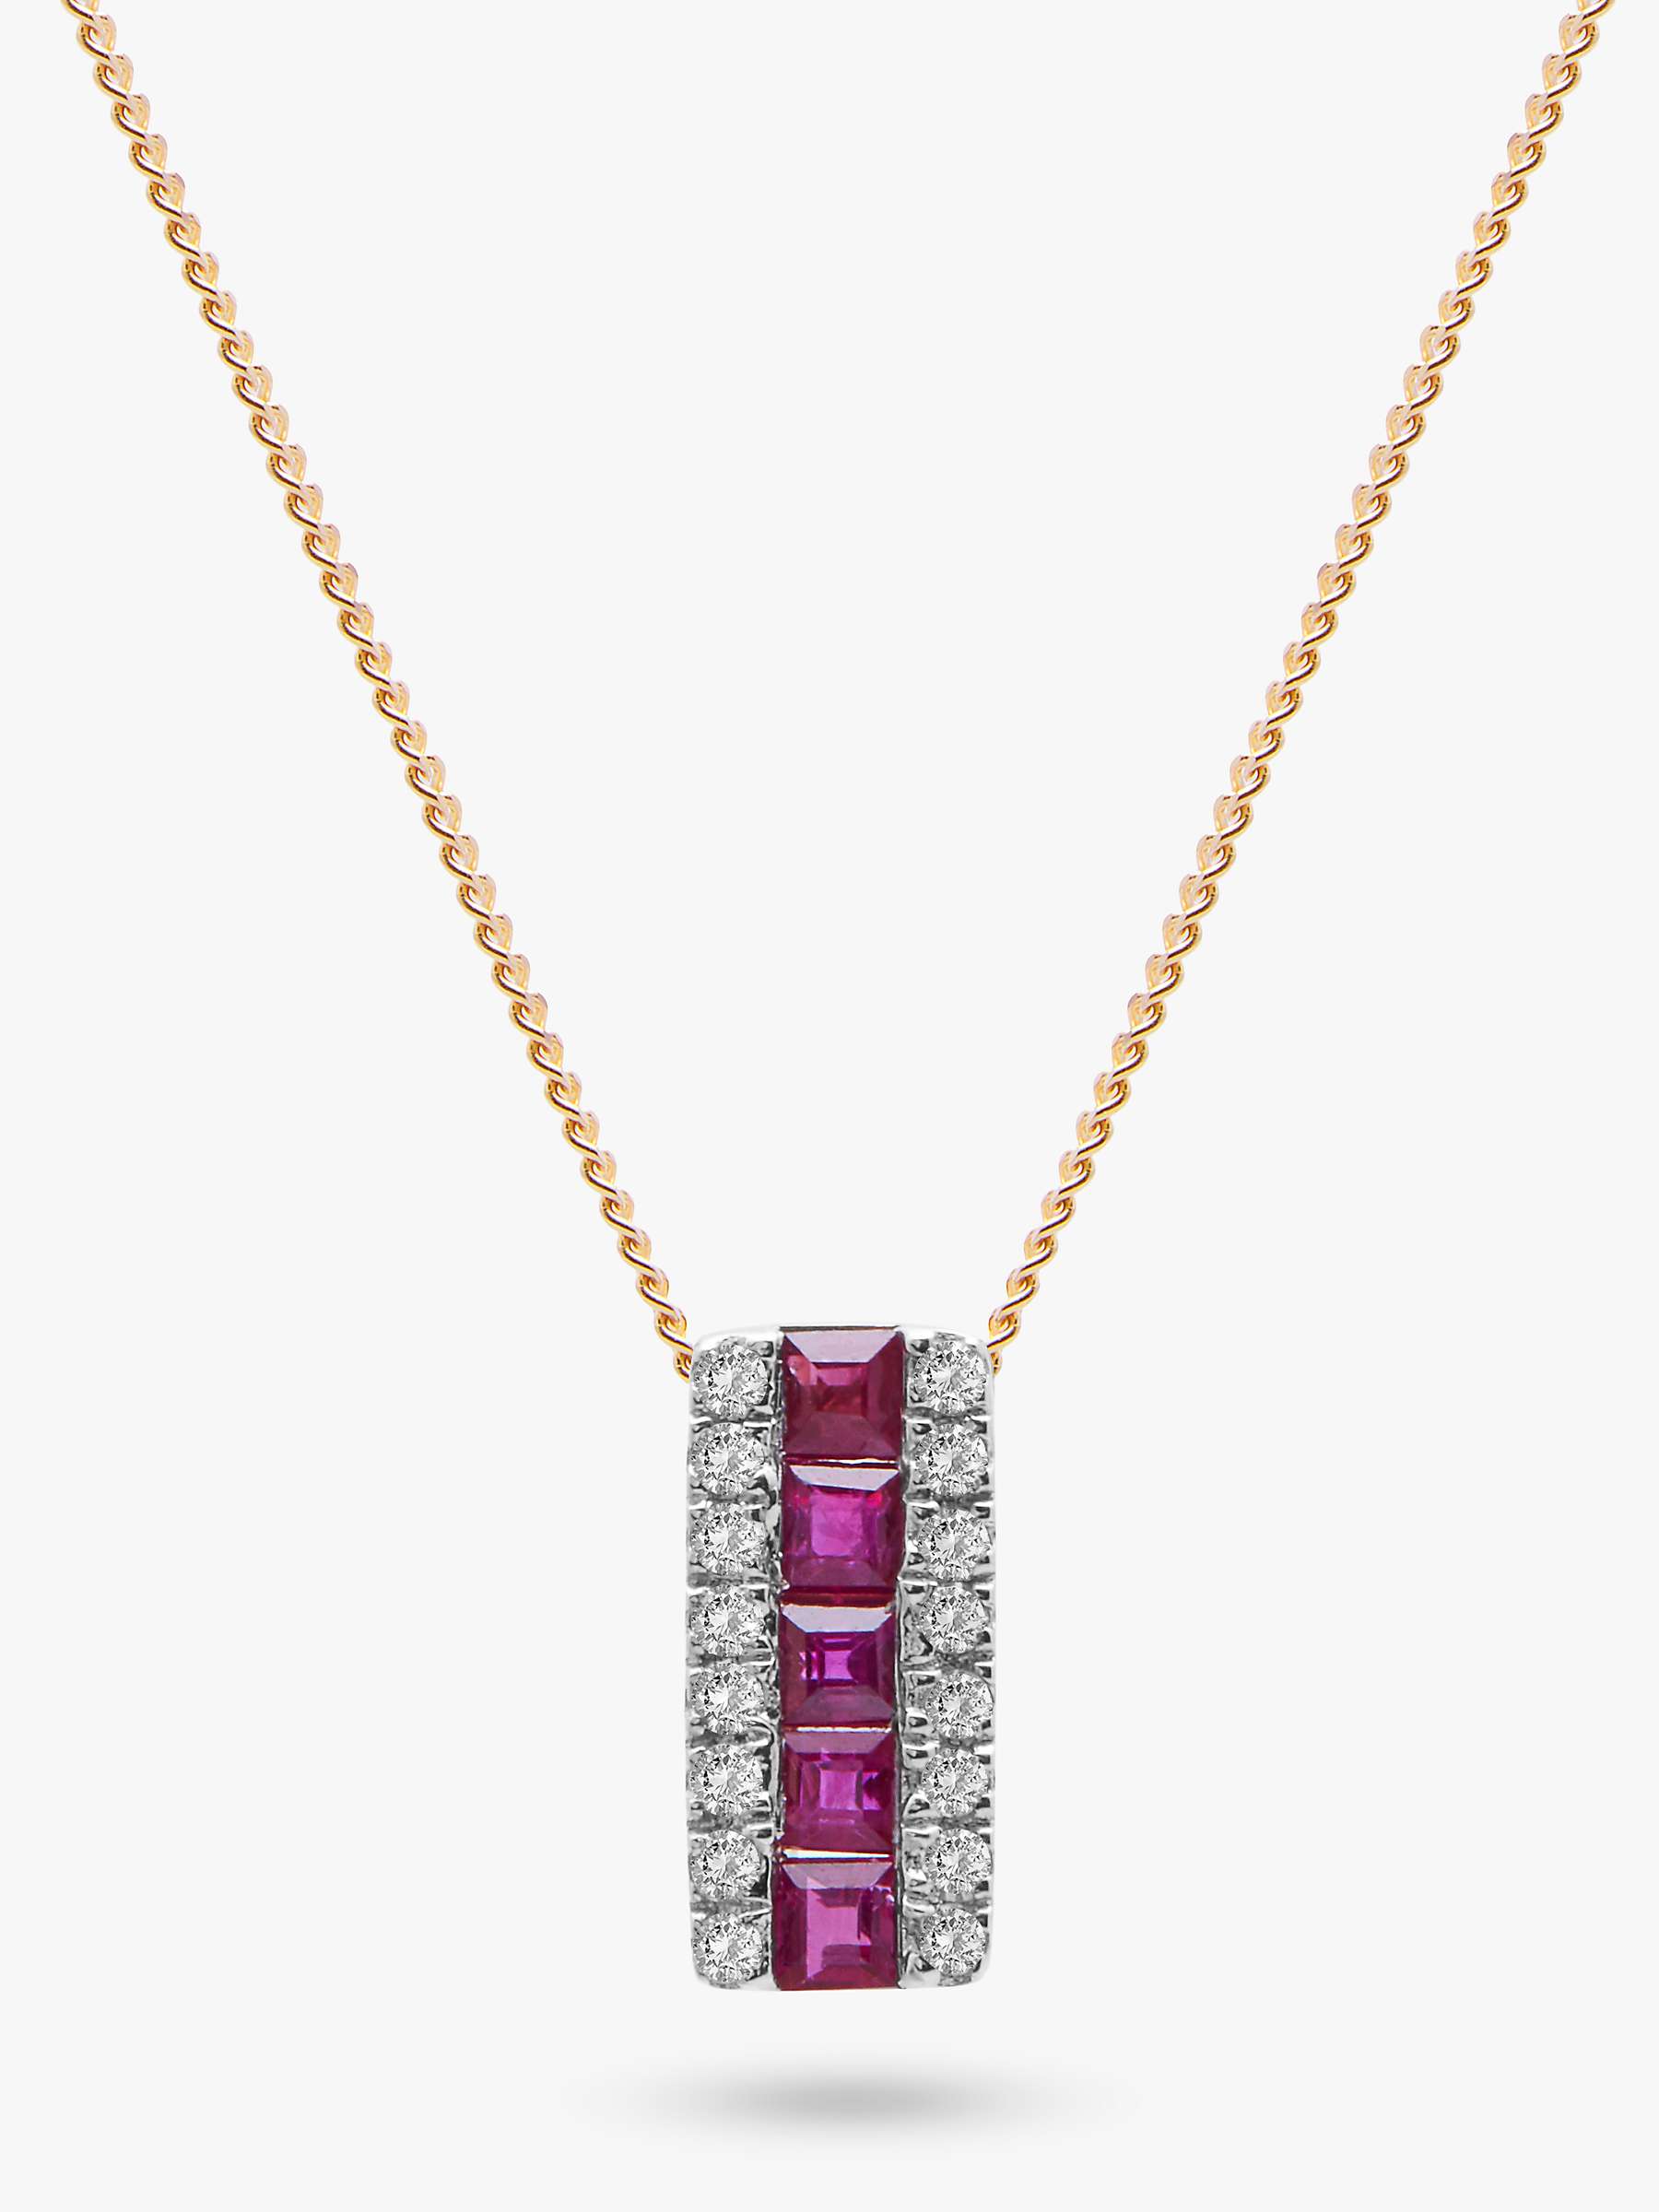 Buy A B Davis 9ct Gold Diamond and Ruby Rectangular Pendant Necklace Online at johnlewis.com